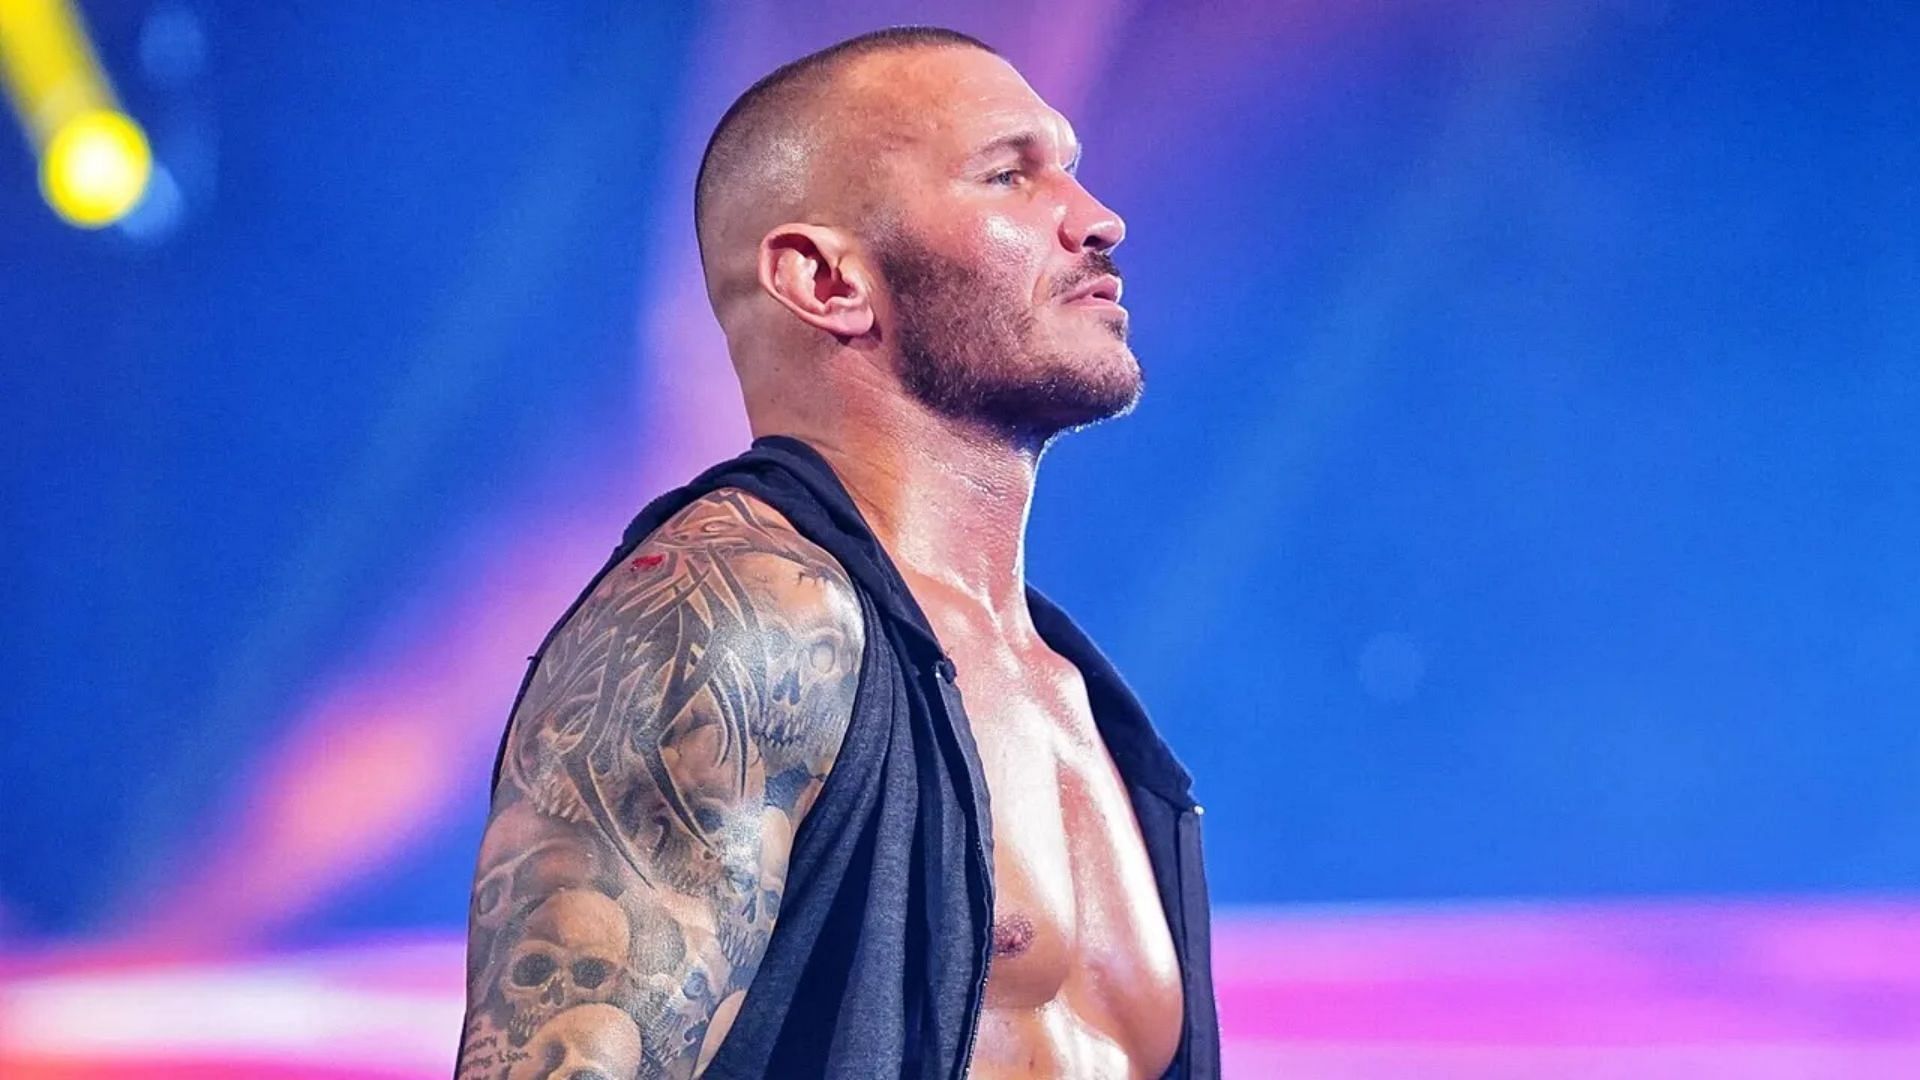 Randy Orton is one of the greatest WWE Superstars of all time